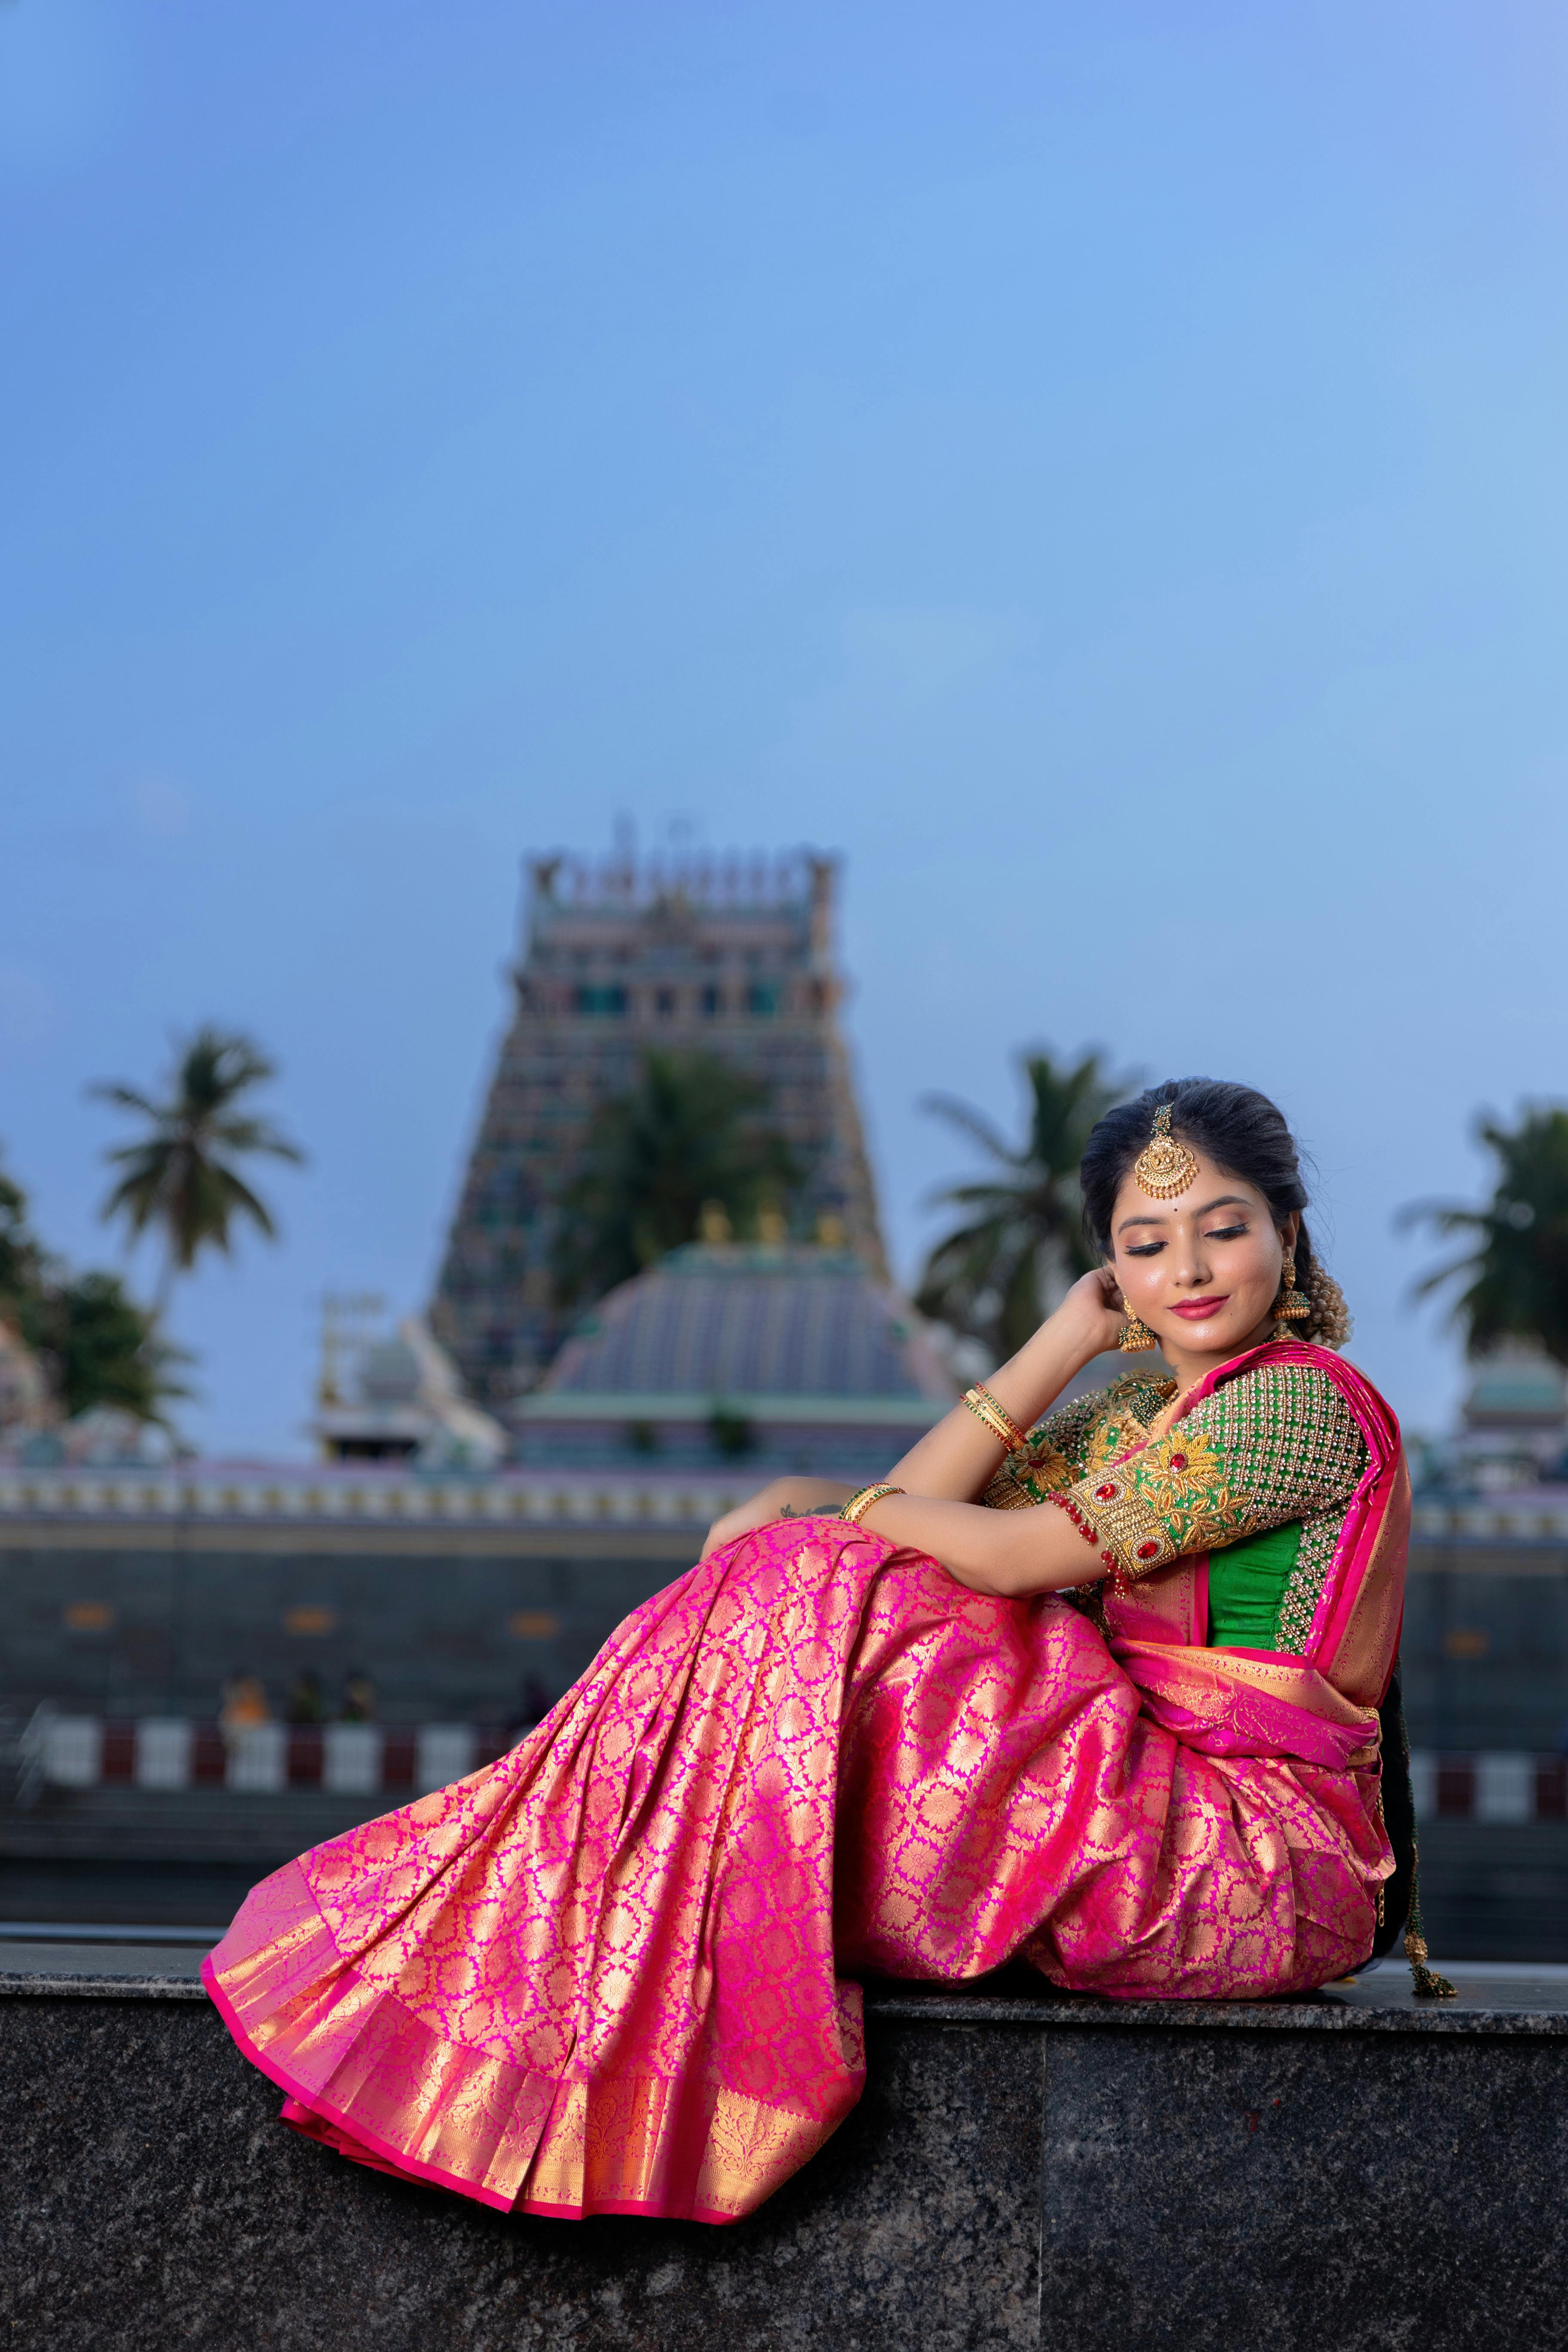 Beautiful Ethnic Indian Saree. Young Woman in Red, Colorful, Sensual,  Wedding and Very Feminine Outfit - Indian Sari Poses on Old Stock Photo -  Image of costume, beauty: 206589066